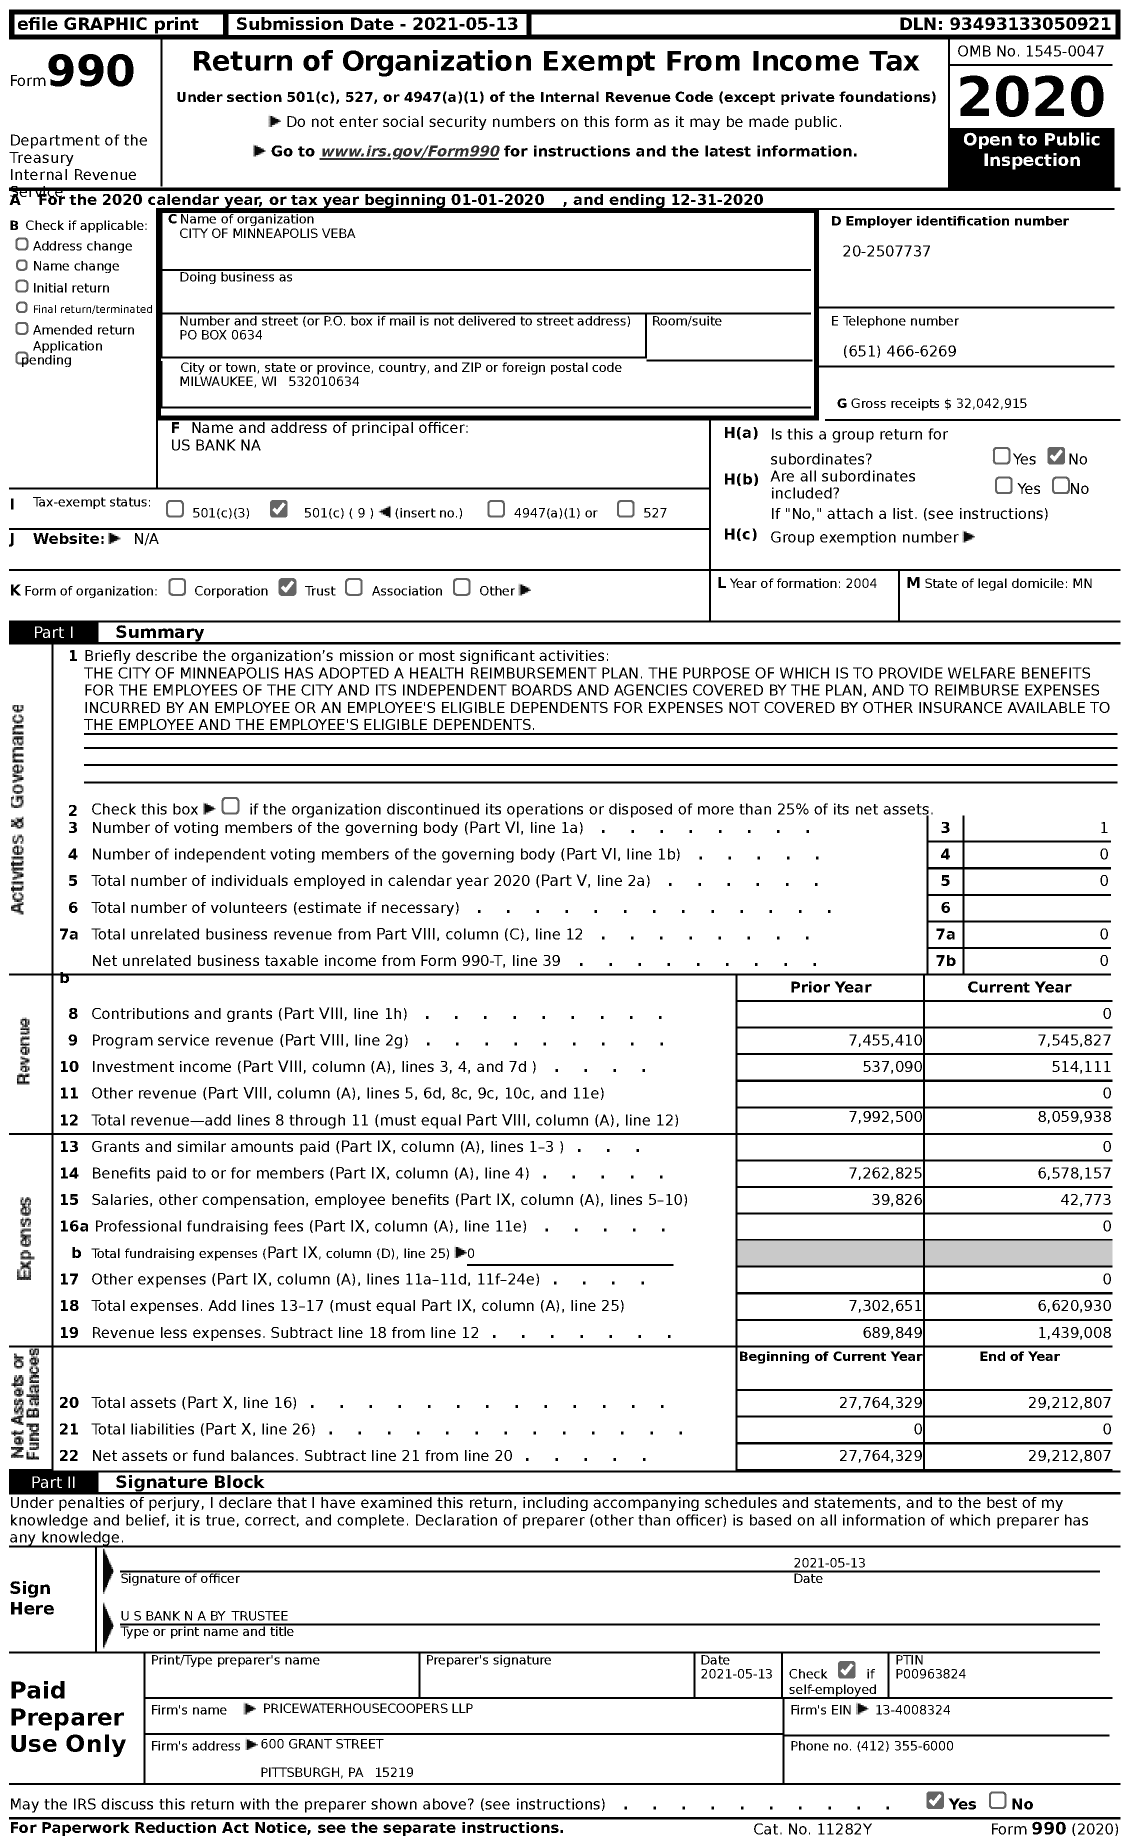 Image of first page of 2020 Form 990 for City of Minneapolis Veba